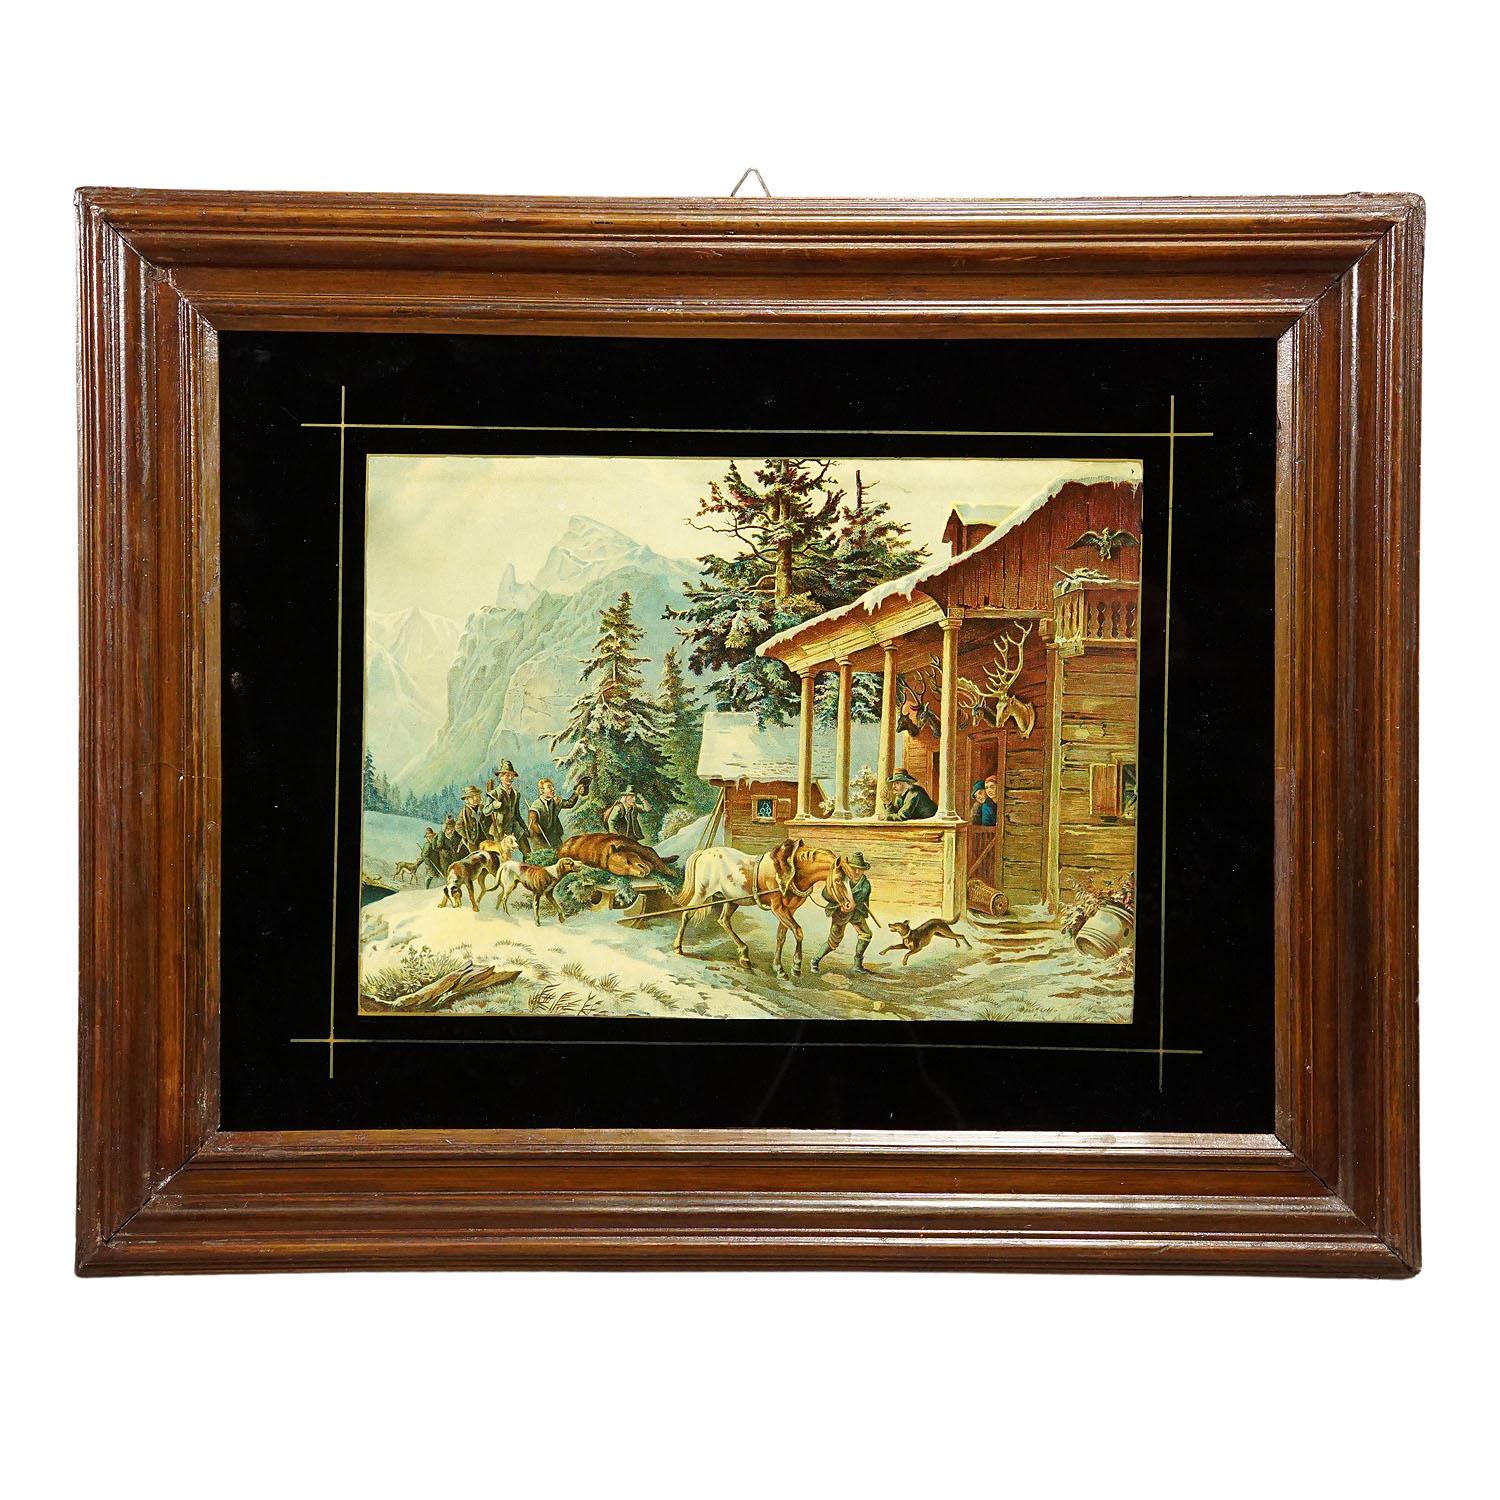 Antique Oil Print with Bear Hunt Scene after Heinrich Buerkel 19th cetntury

A colorful oil print depicting an alpine bear hunt scenery in the Bavarian alps. A hunting crew is returning from their hunt with a shot bear on a sledge. The template